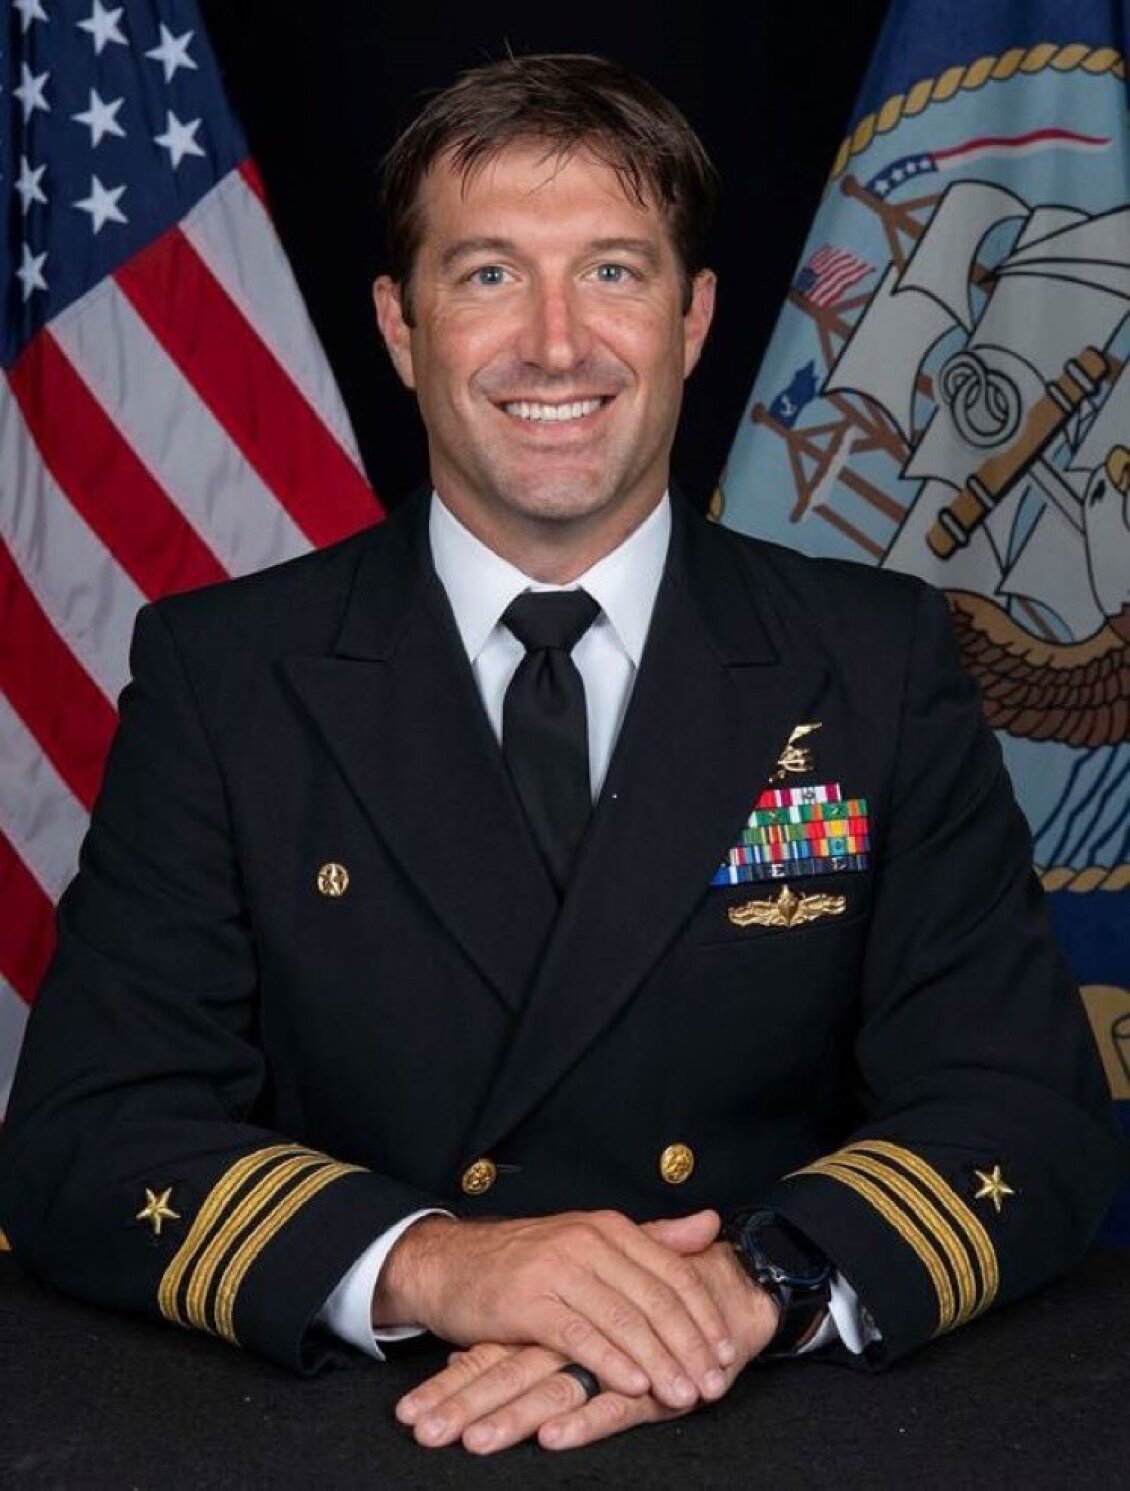 21_12_08-USNI-USN-SEAL_TEAM_8-CO_COMMANDER_BRIAN_BOURGOIS-DIED_07_12_2021-ACCIDENT_04_12_2021